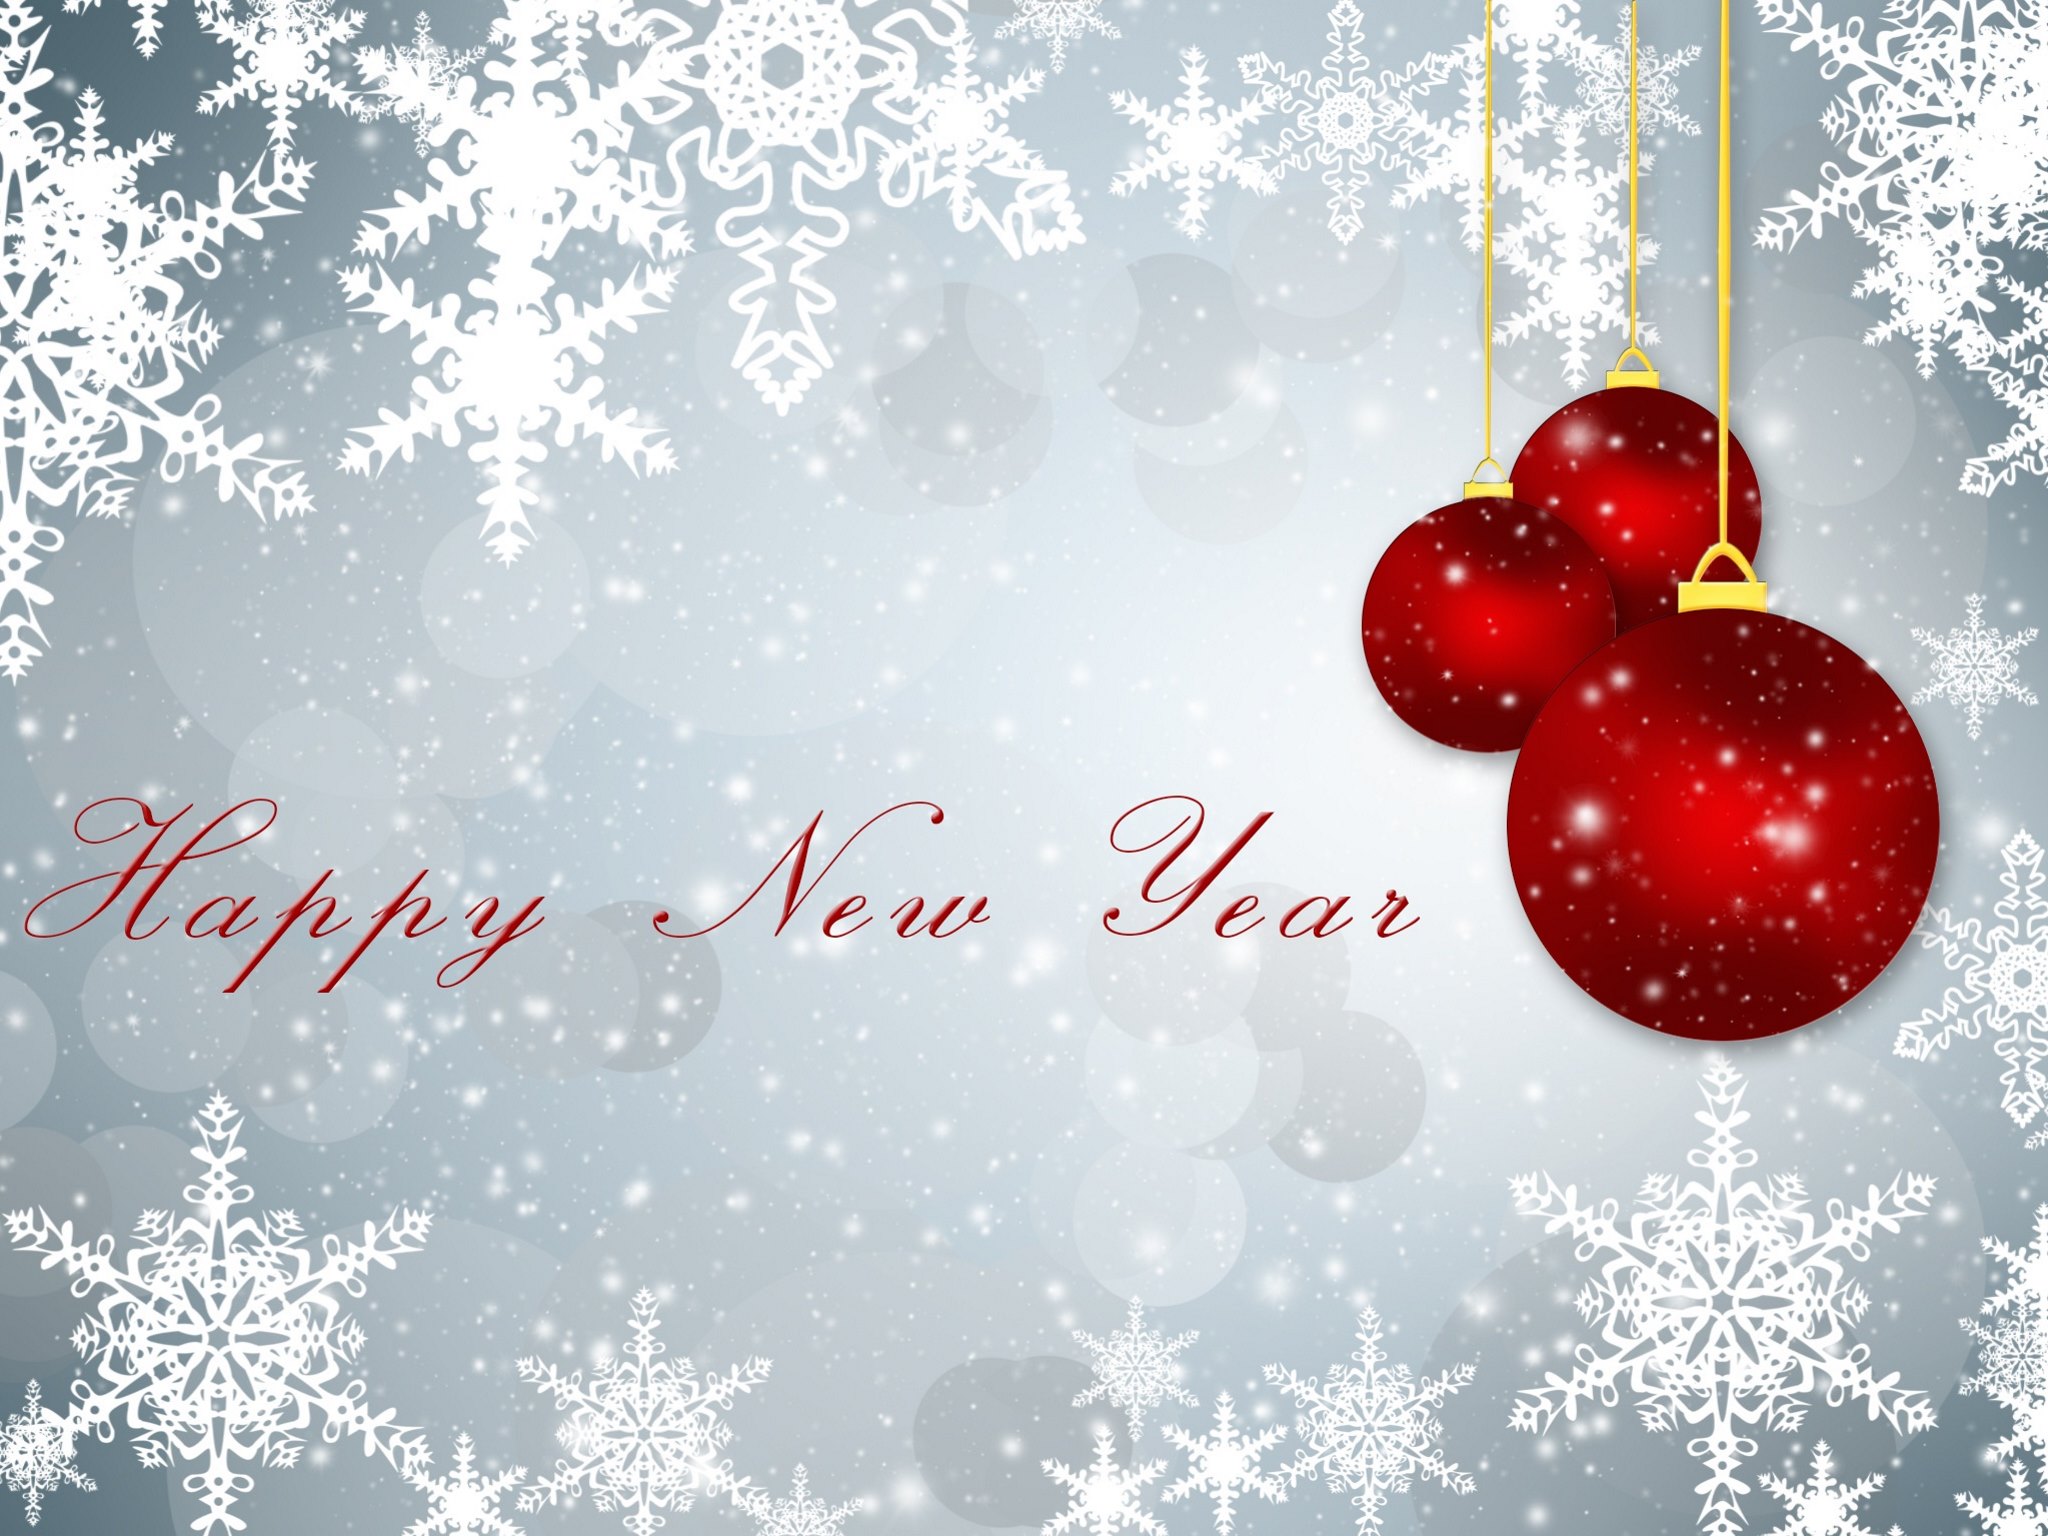 Mobile HD Wallpaper New Year 